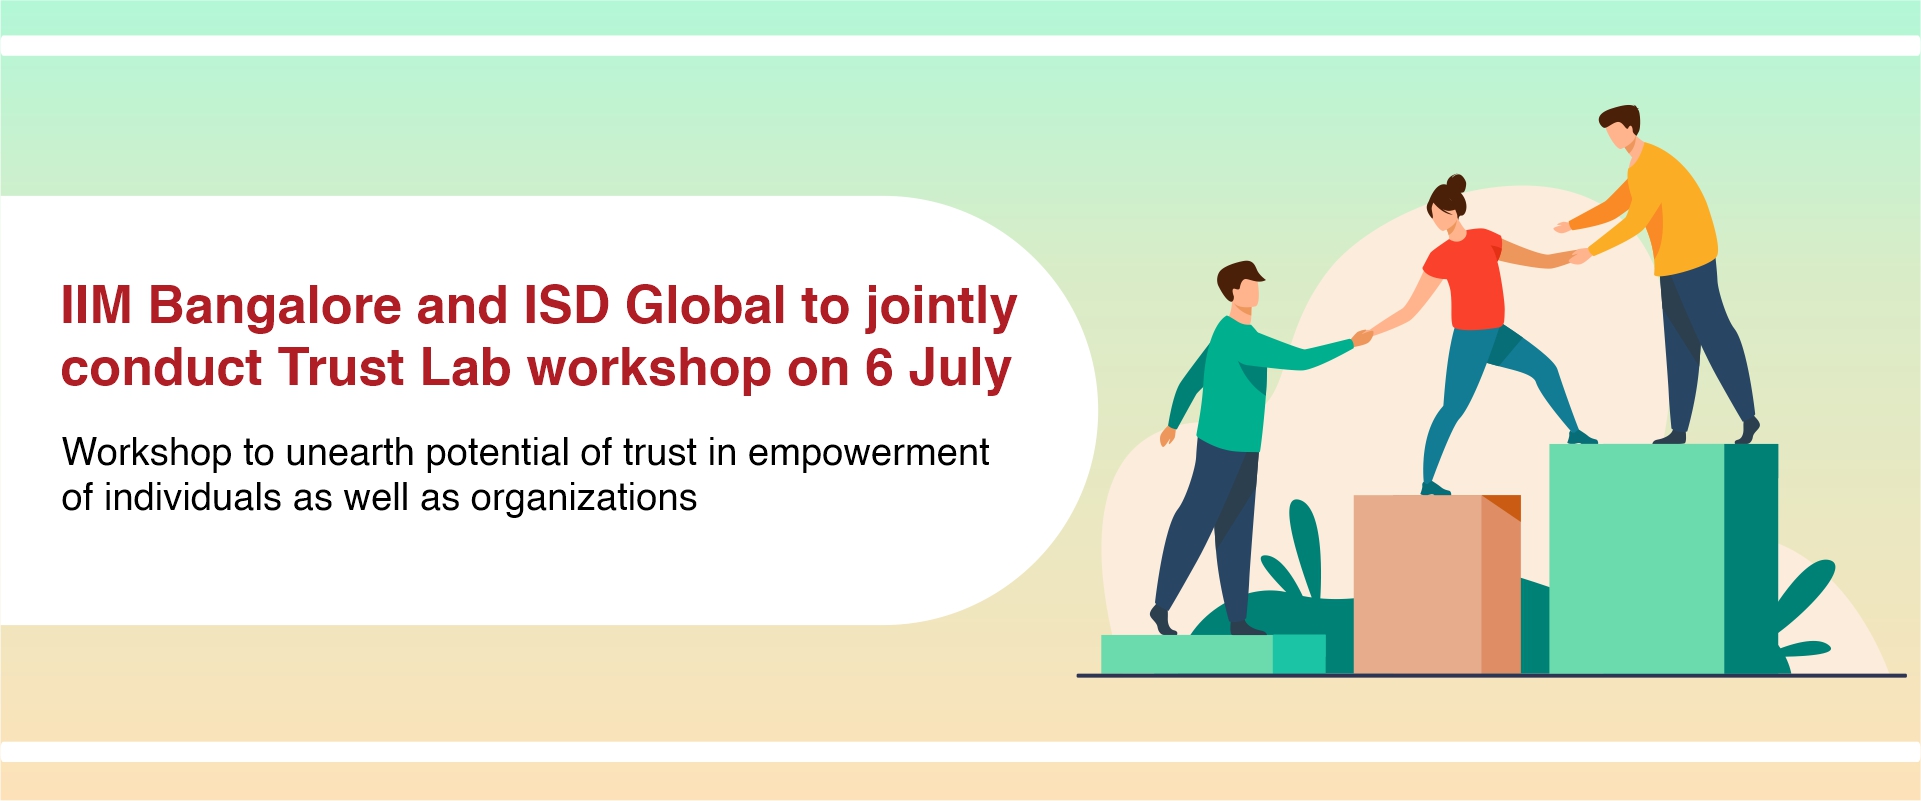 IIM Bangalore and ISD Global to jointly conduct Trust Lab workshop on 6 July 